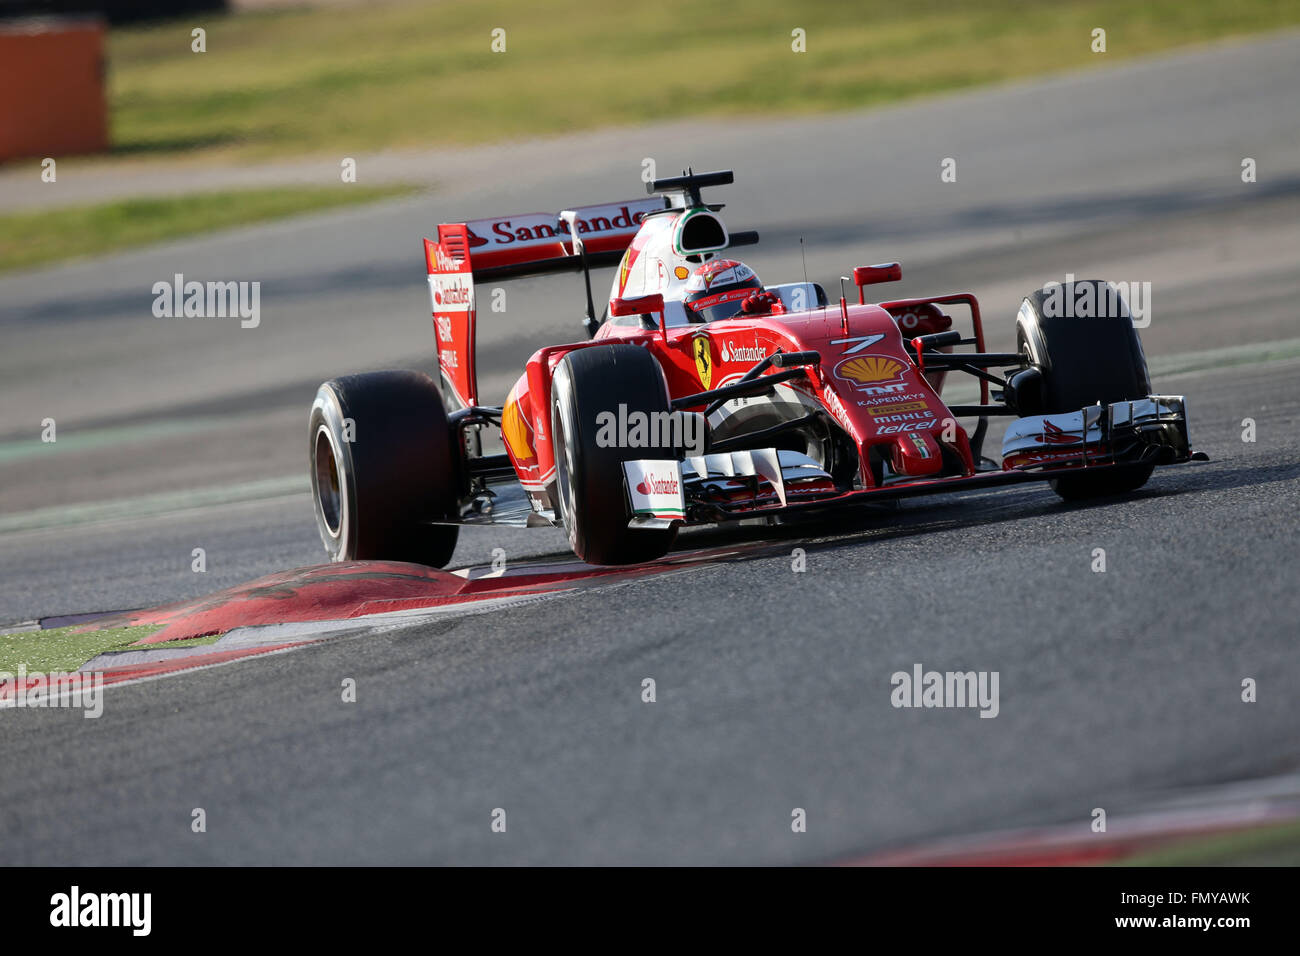 Finnish Formula One driver Kimi Raikkonnen of Ferrari steers his car during the training session for the upcoming Formula One season at the Circuit de Barcelona - Catalunya in Barcelona, Spain, 24 February 2016. Photo: Jens Buettner/dpa Stock Photo